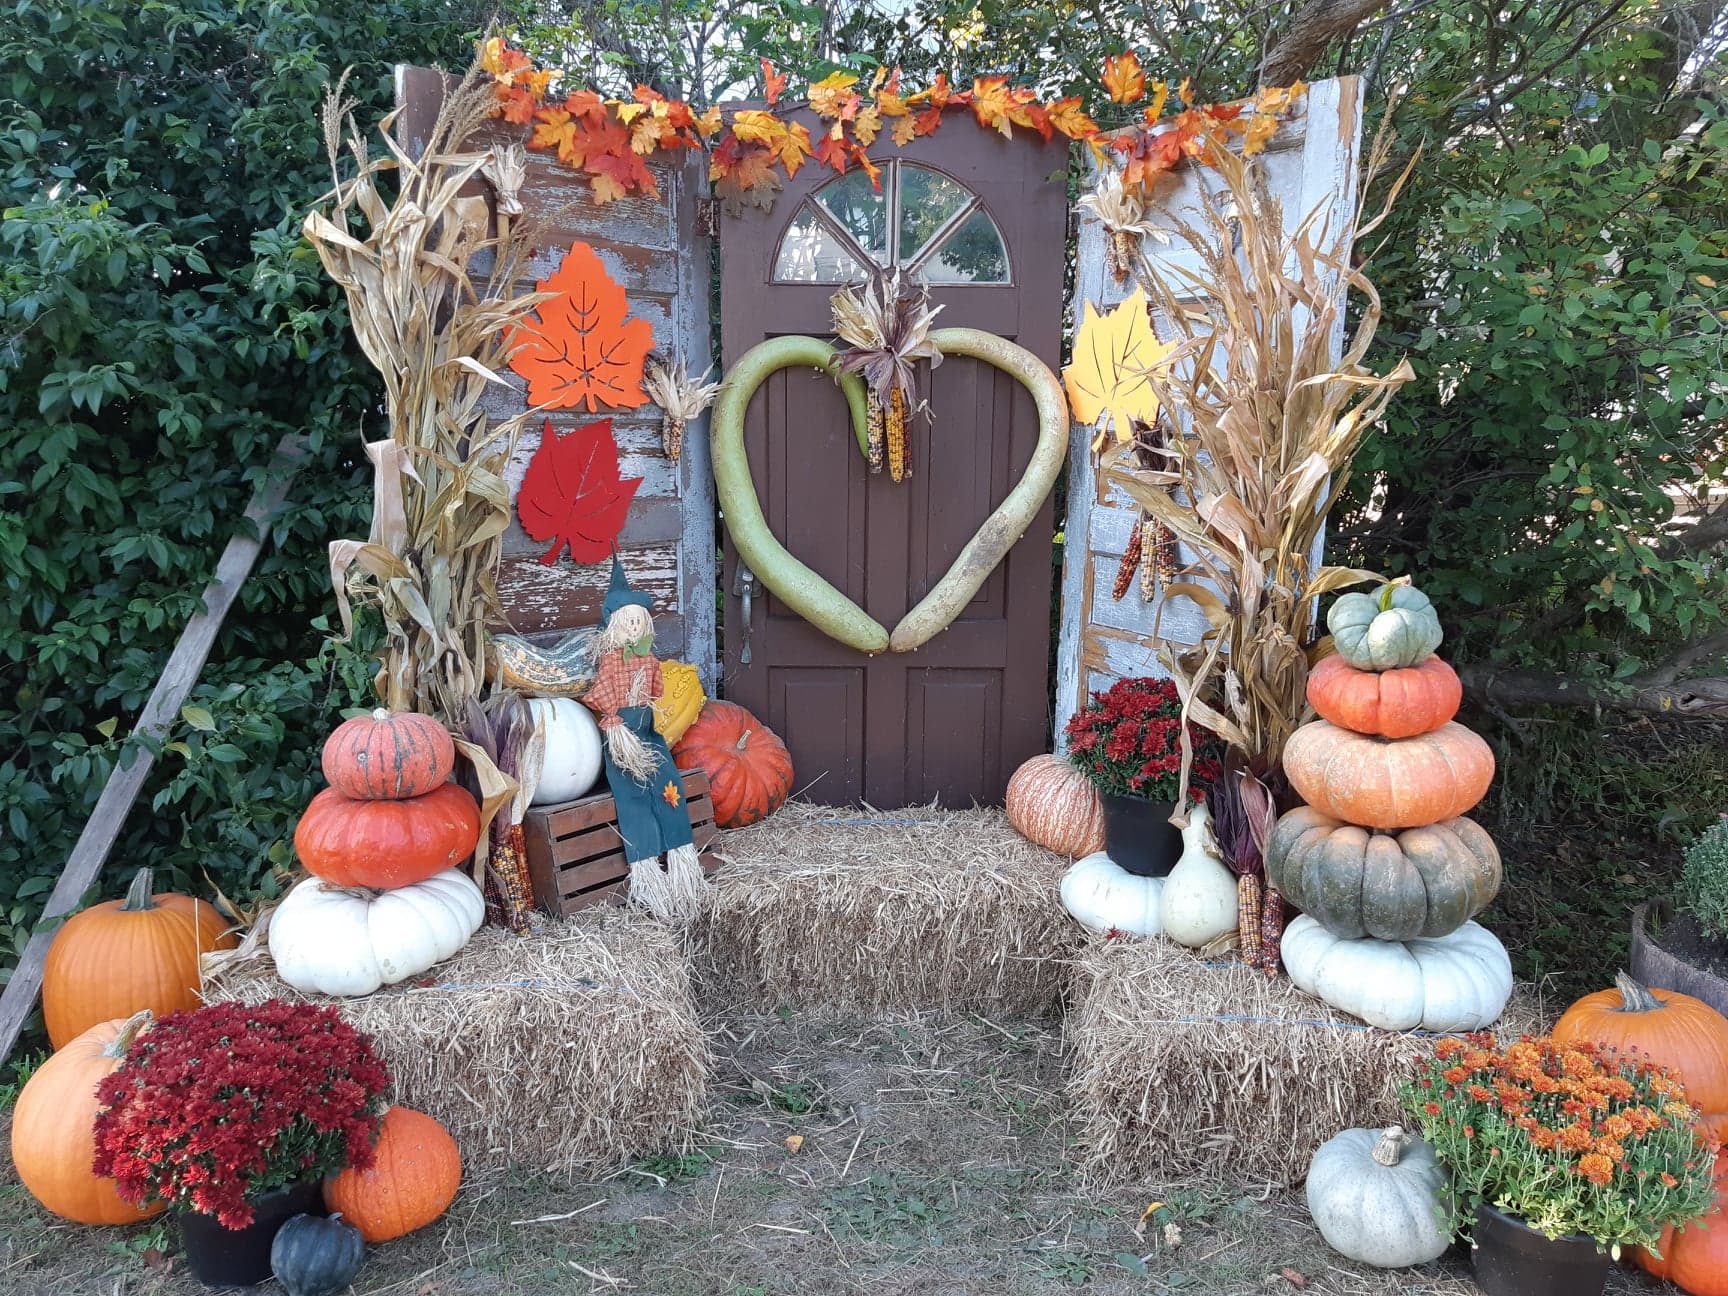 Photo Opportunity in Pumpkin Patch